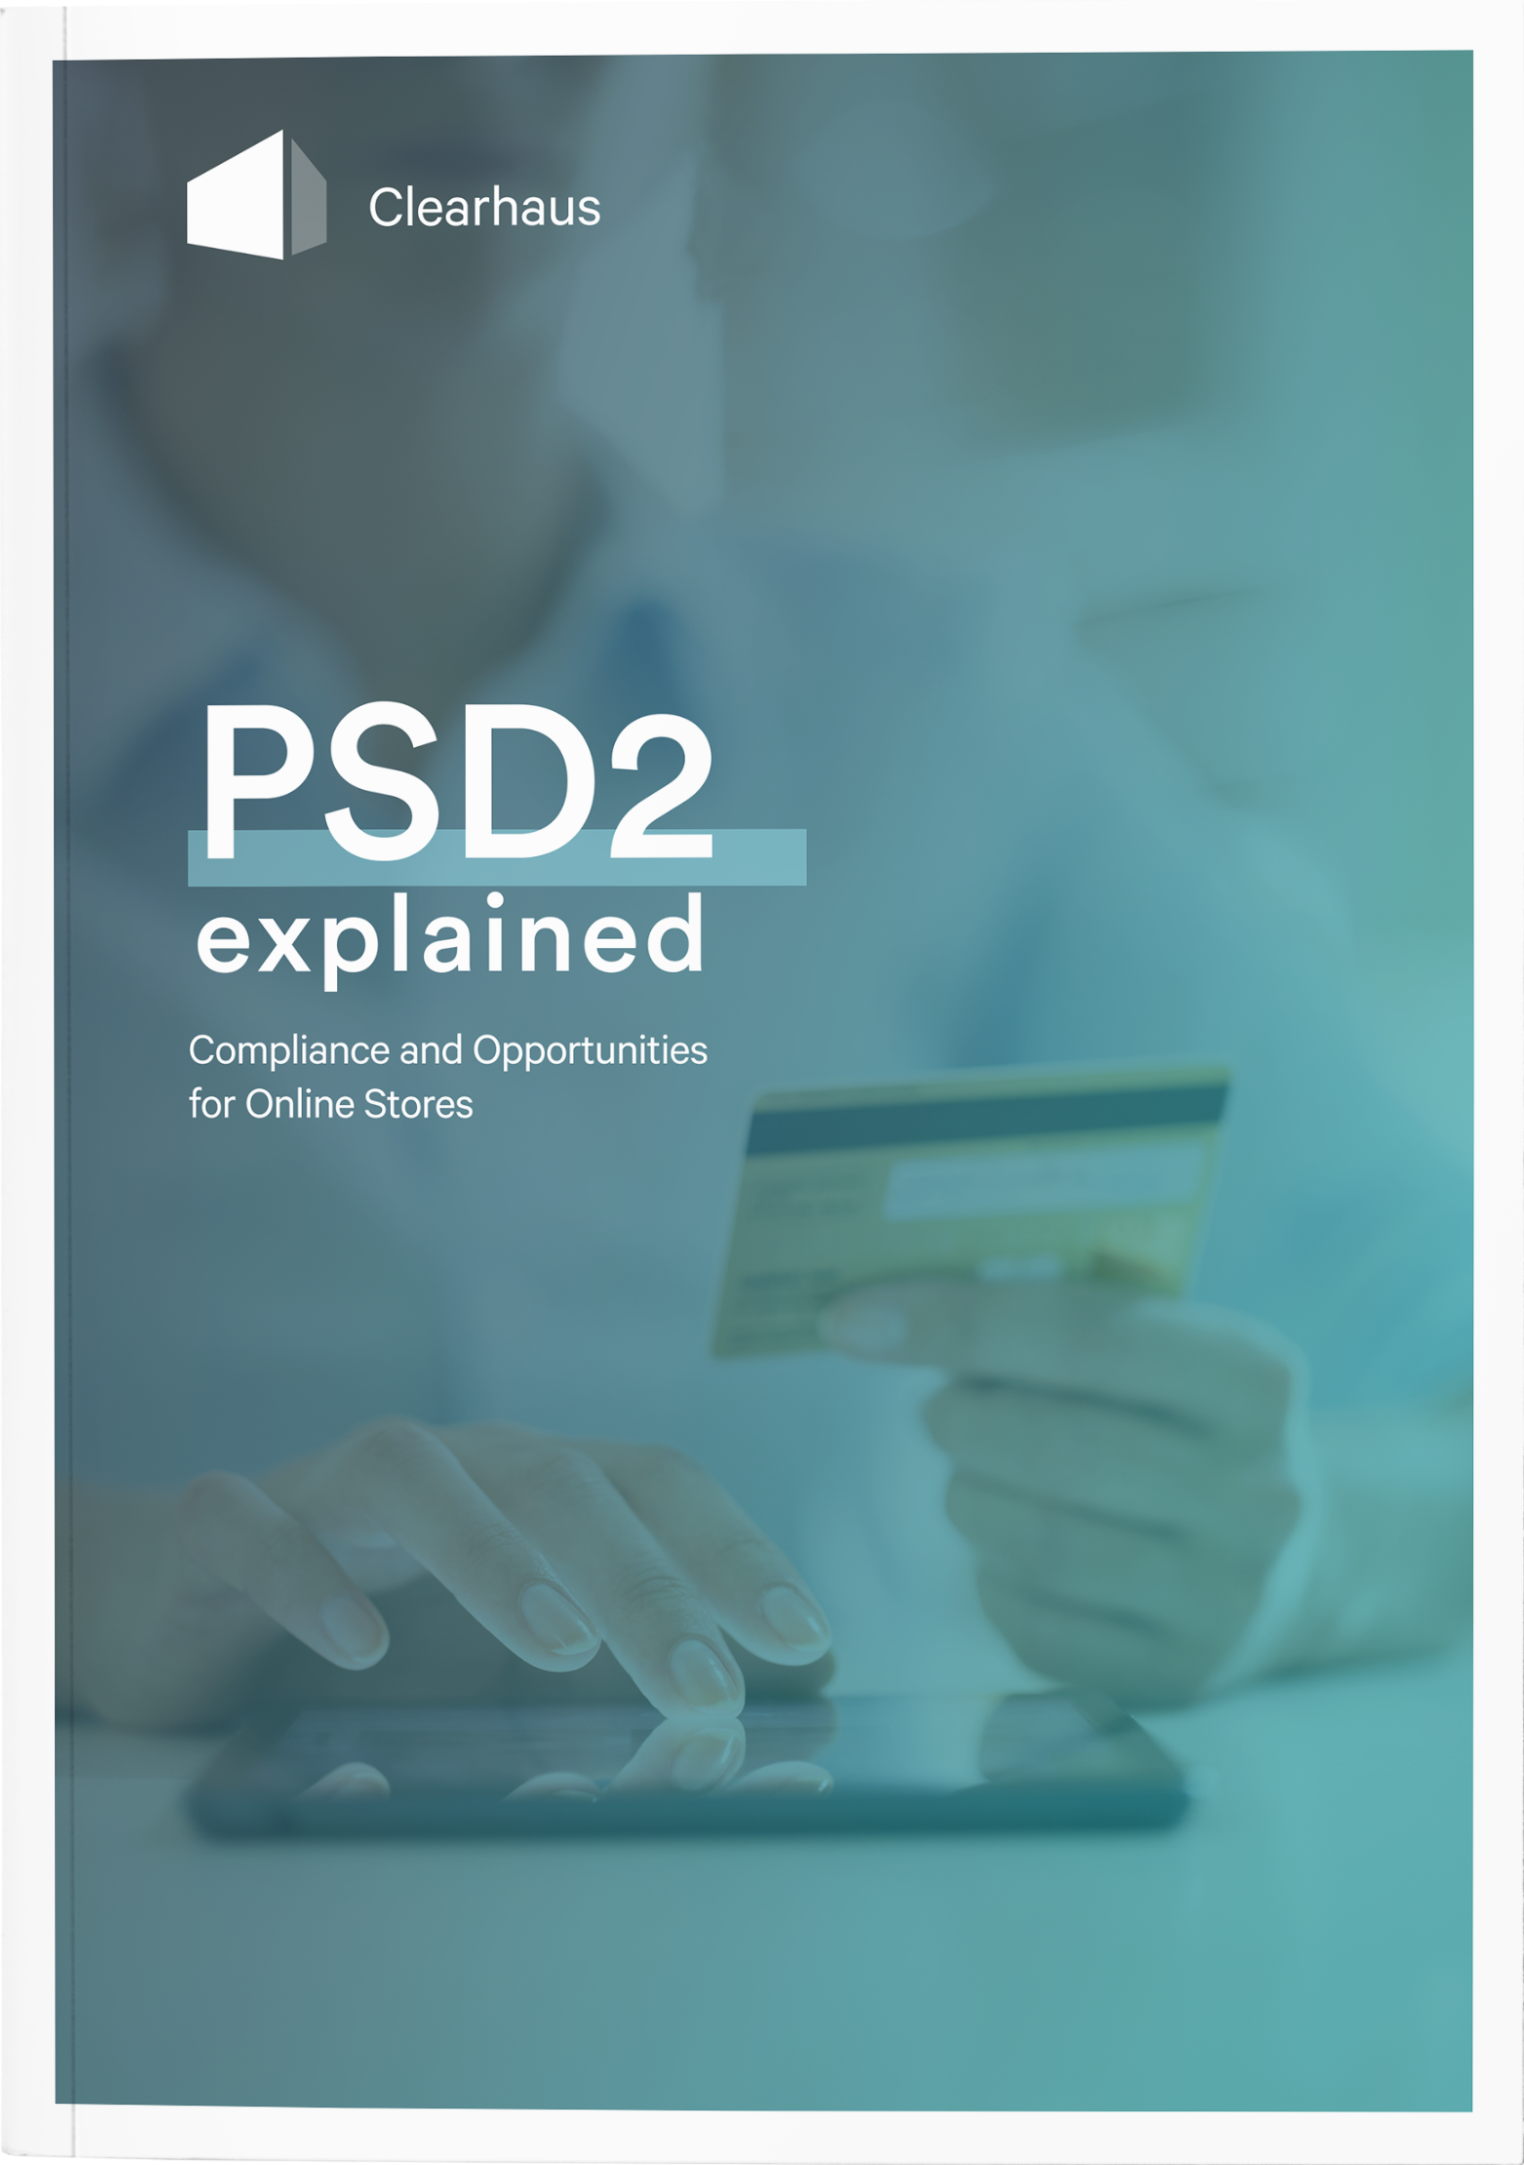 Download PSD2 E-book | Download the Free E-book Here | Clearhaus